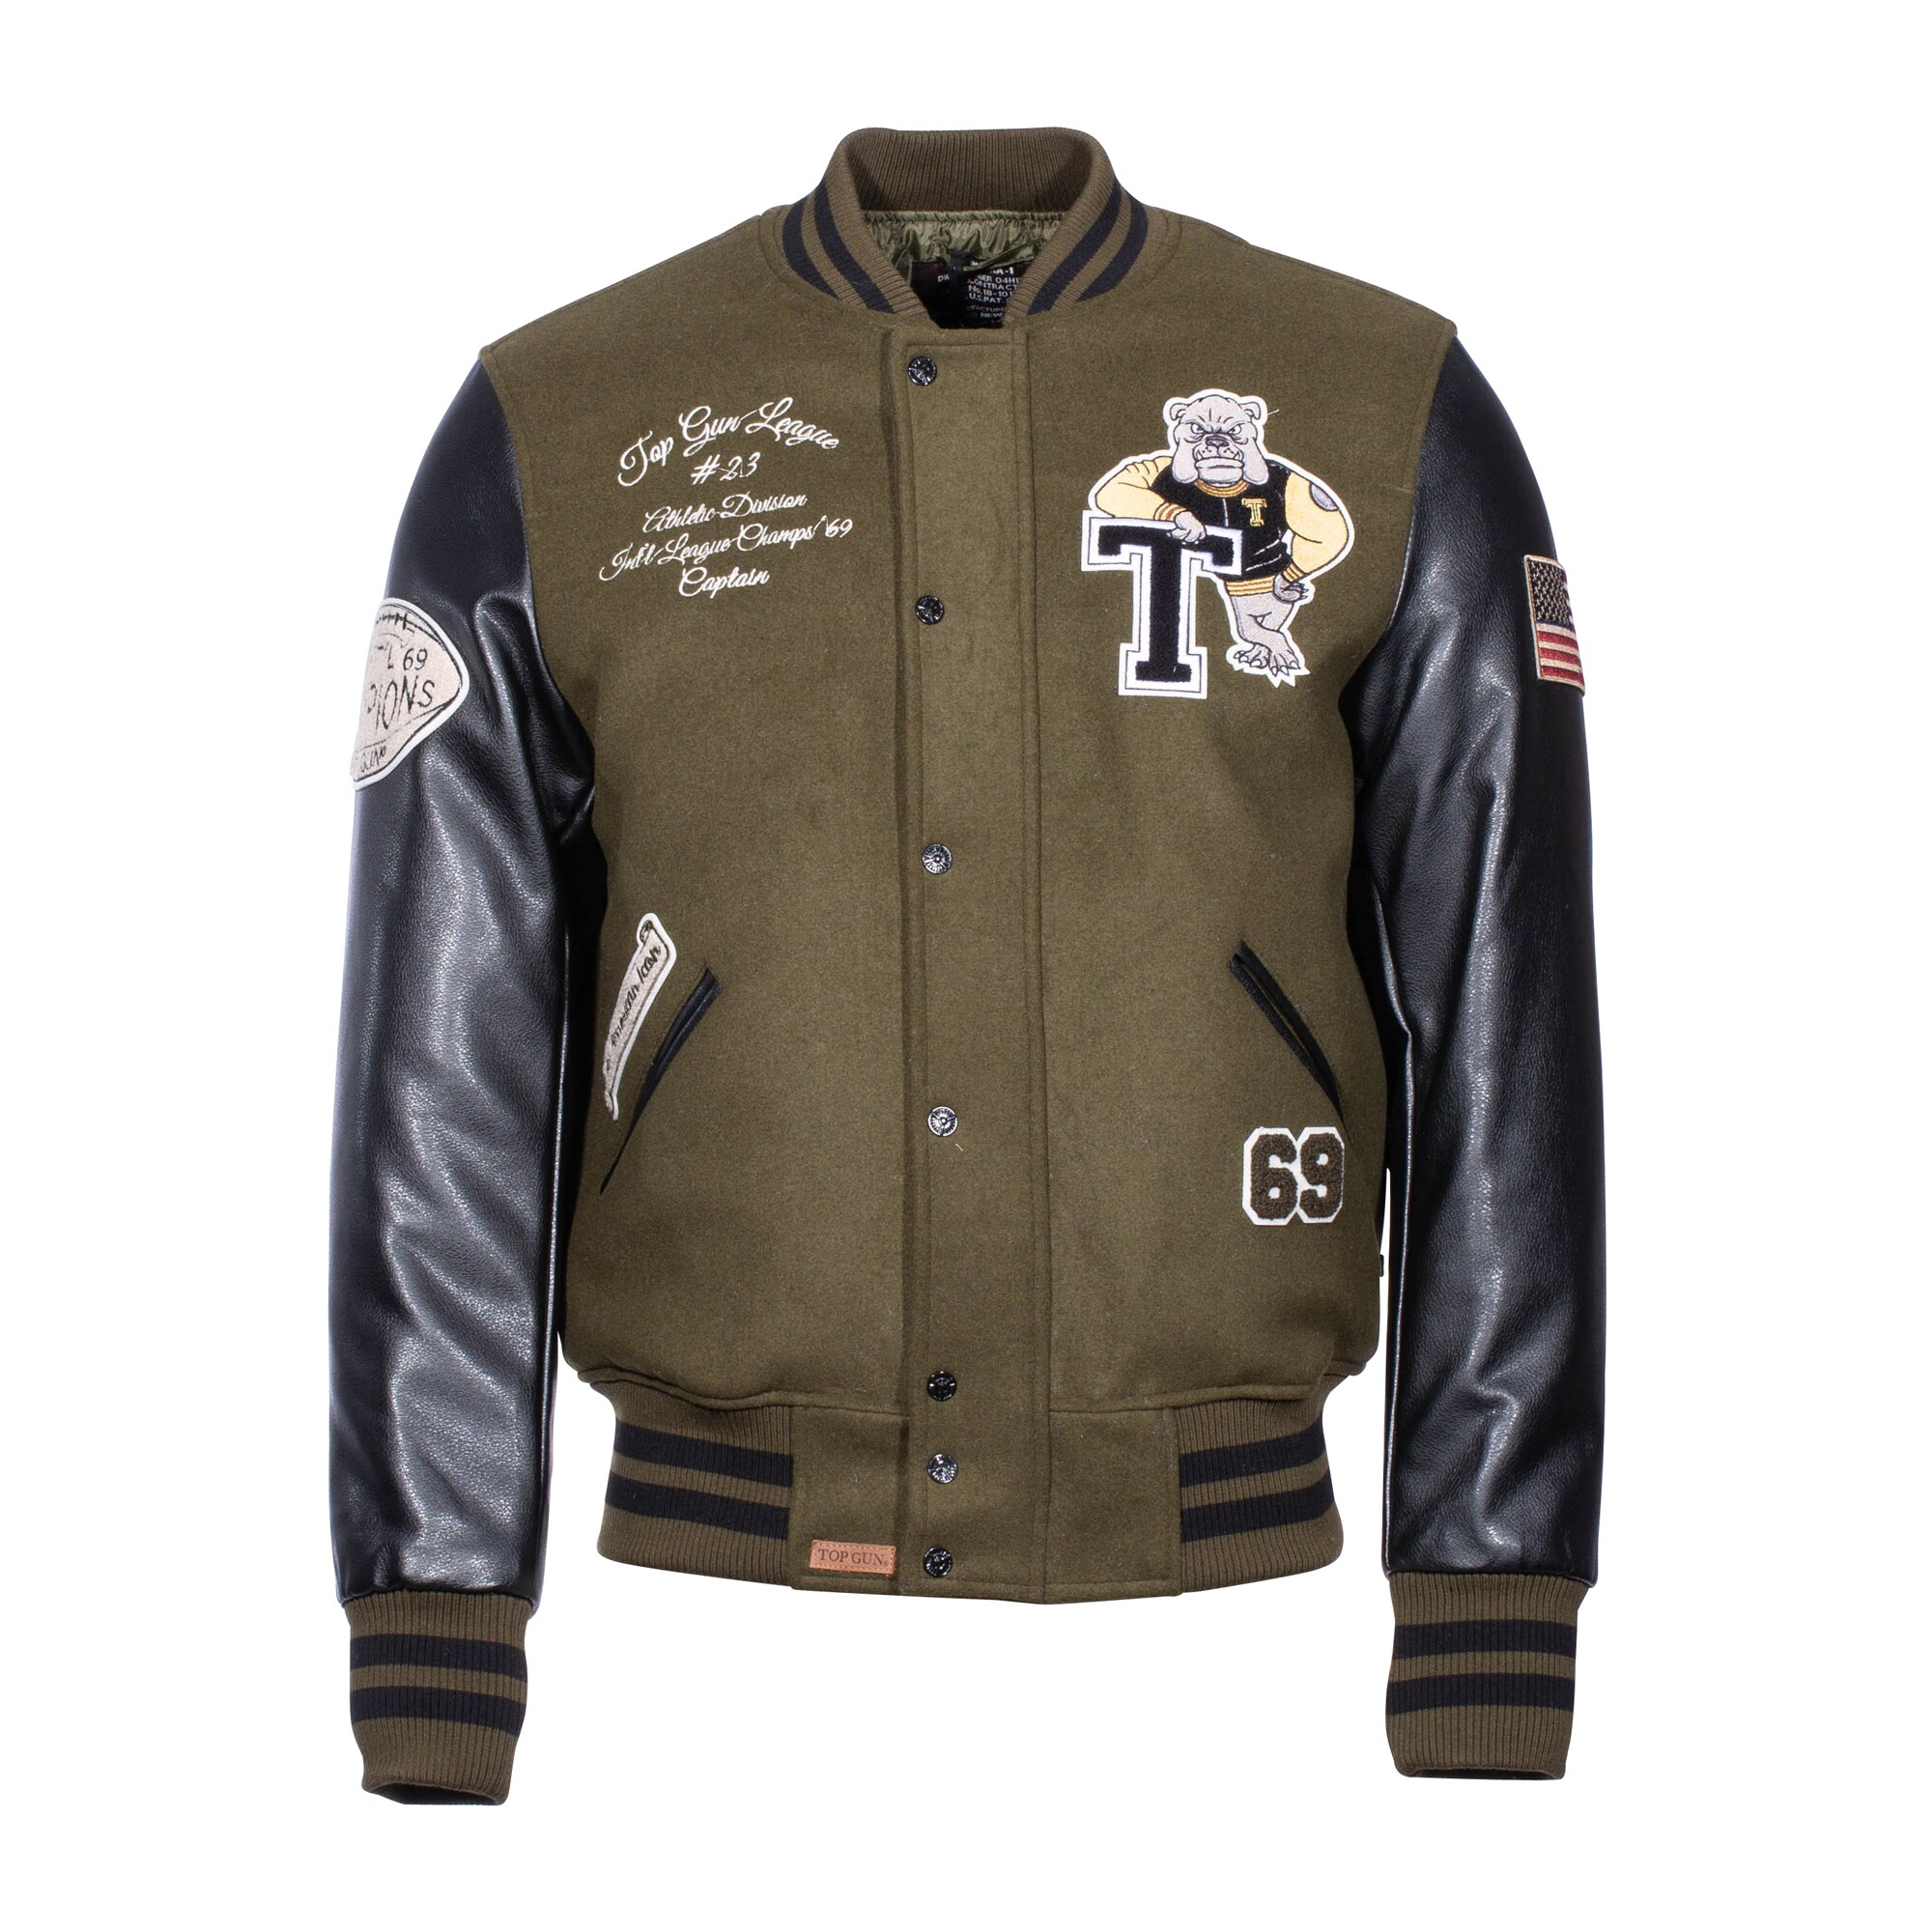 Purchase the Top Gun Baseball Jacket League olive black by ASMC